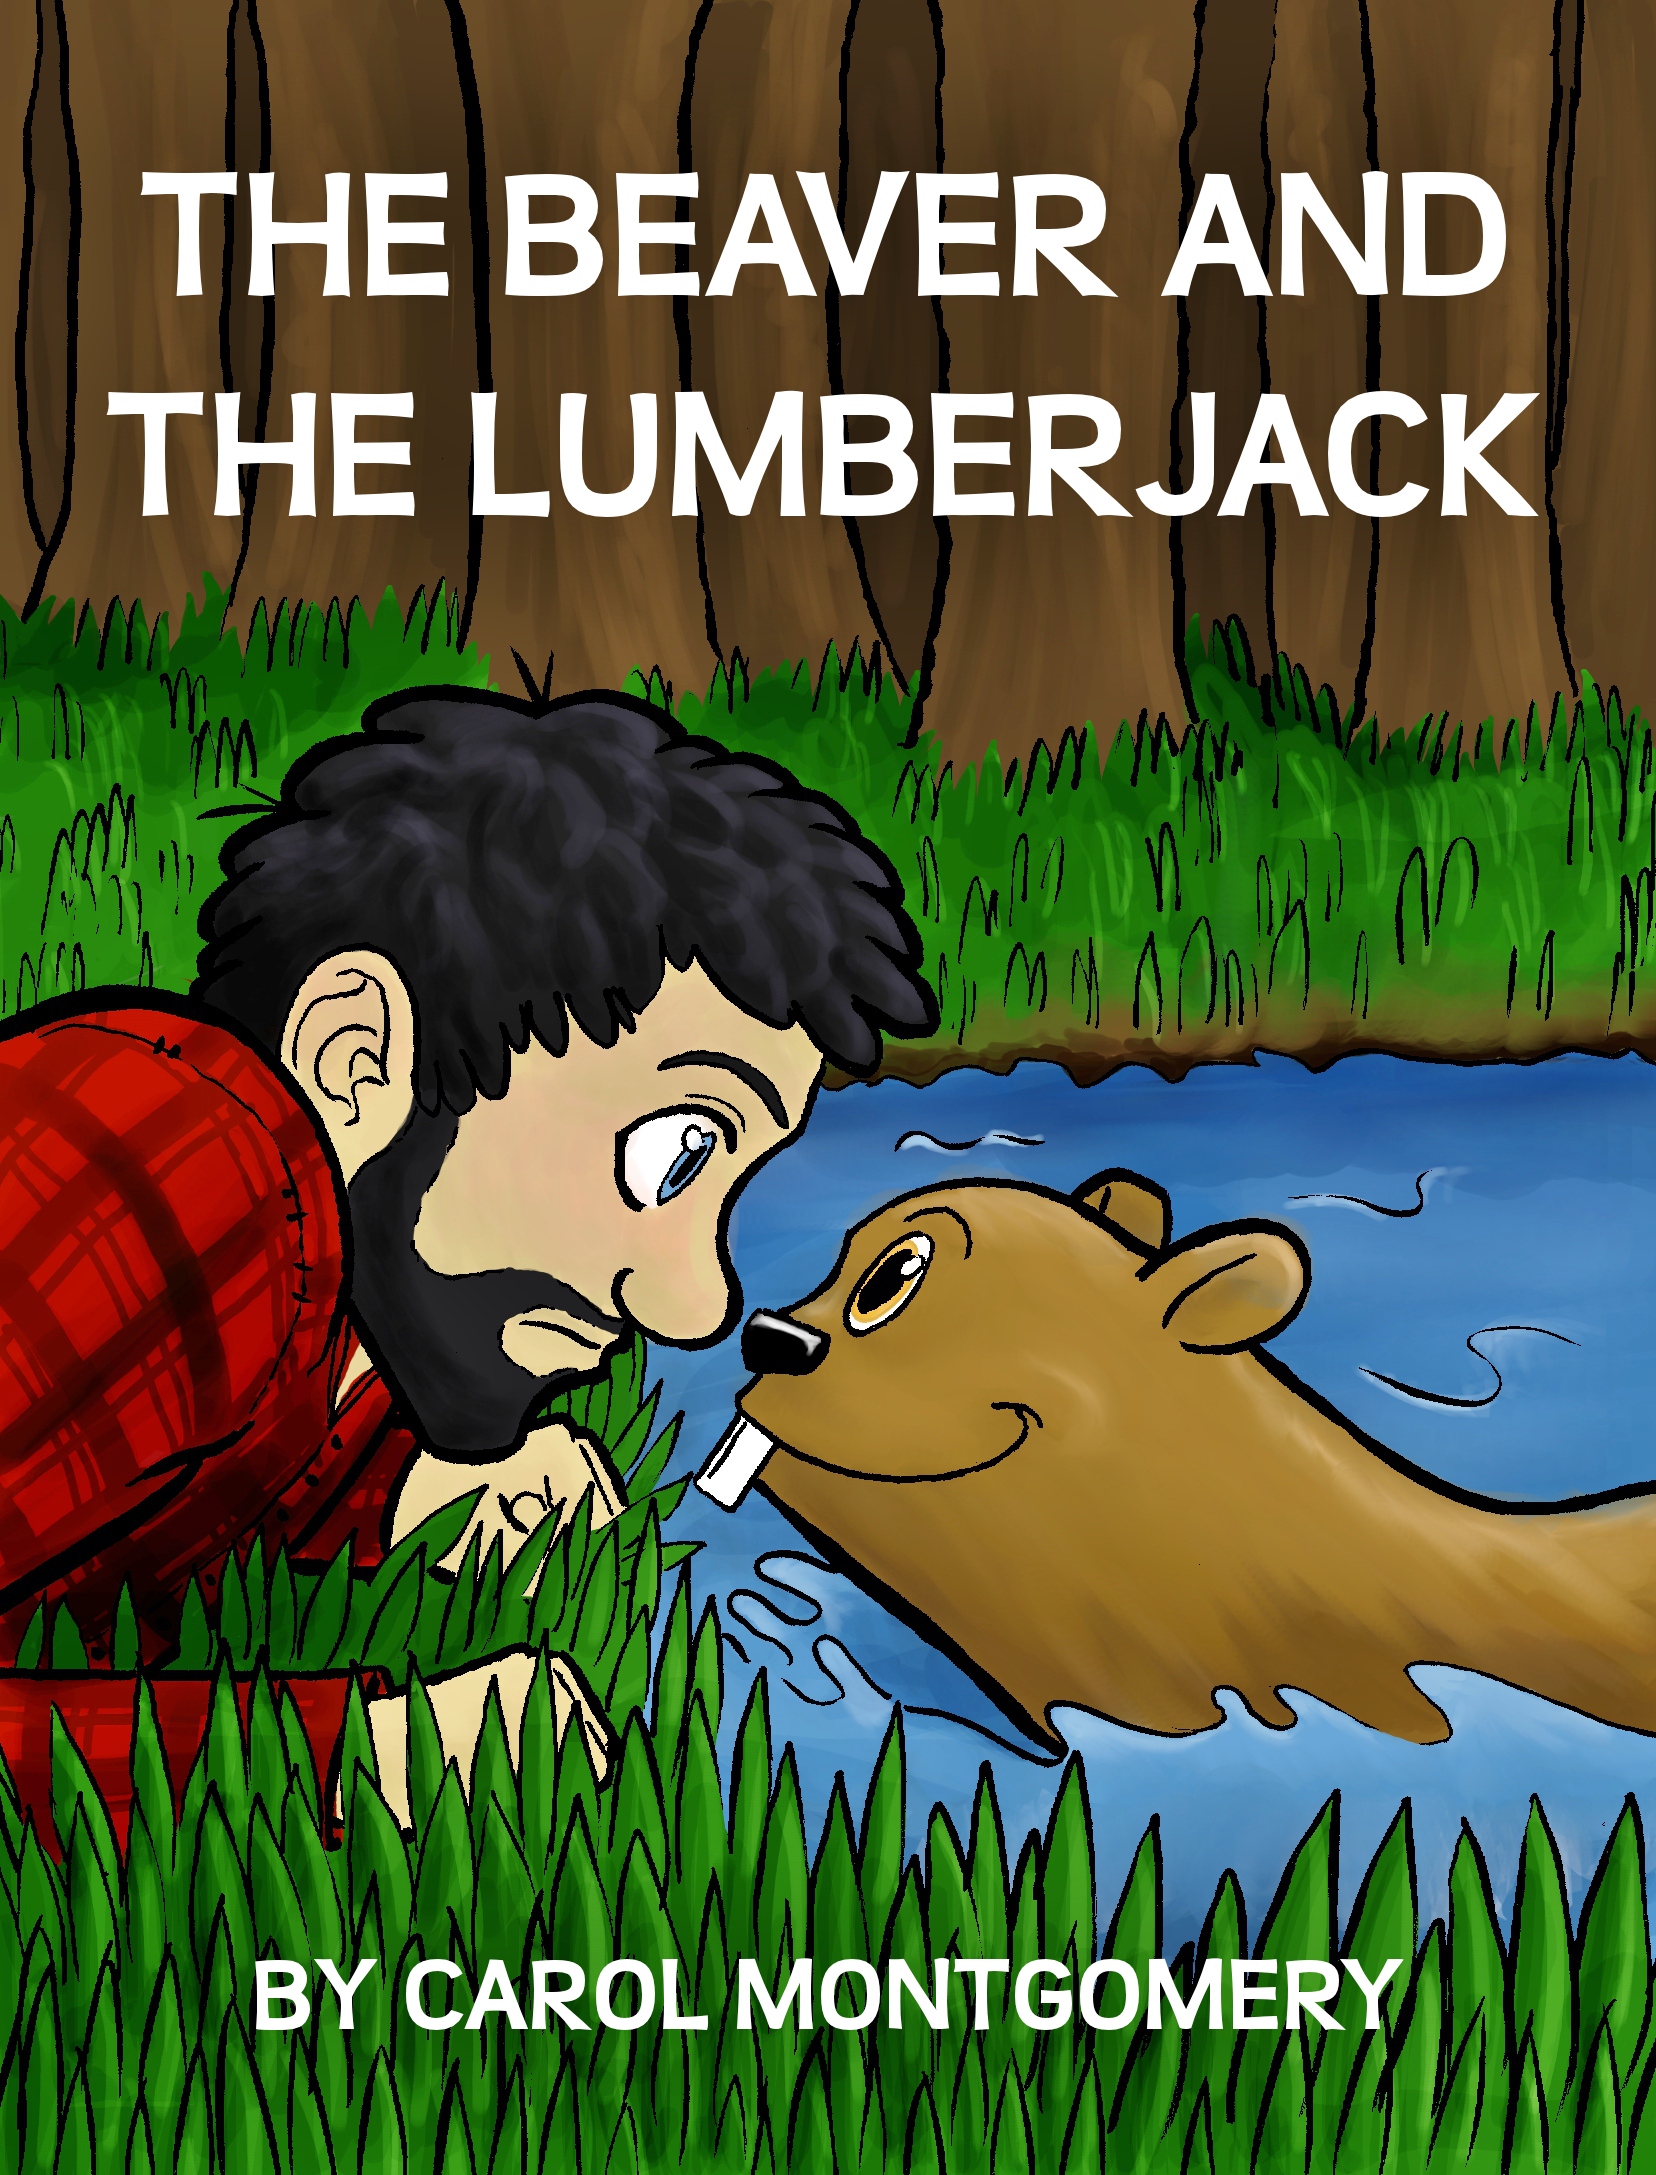 Beaver and the Lumberjack from Aesop's Fables